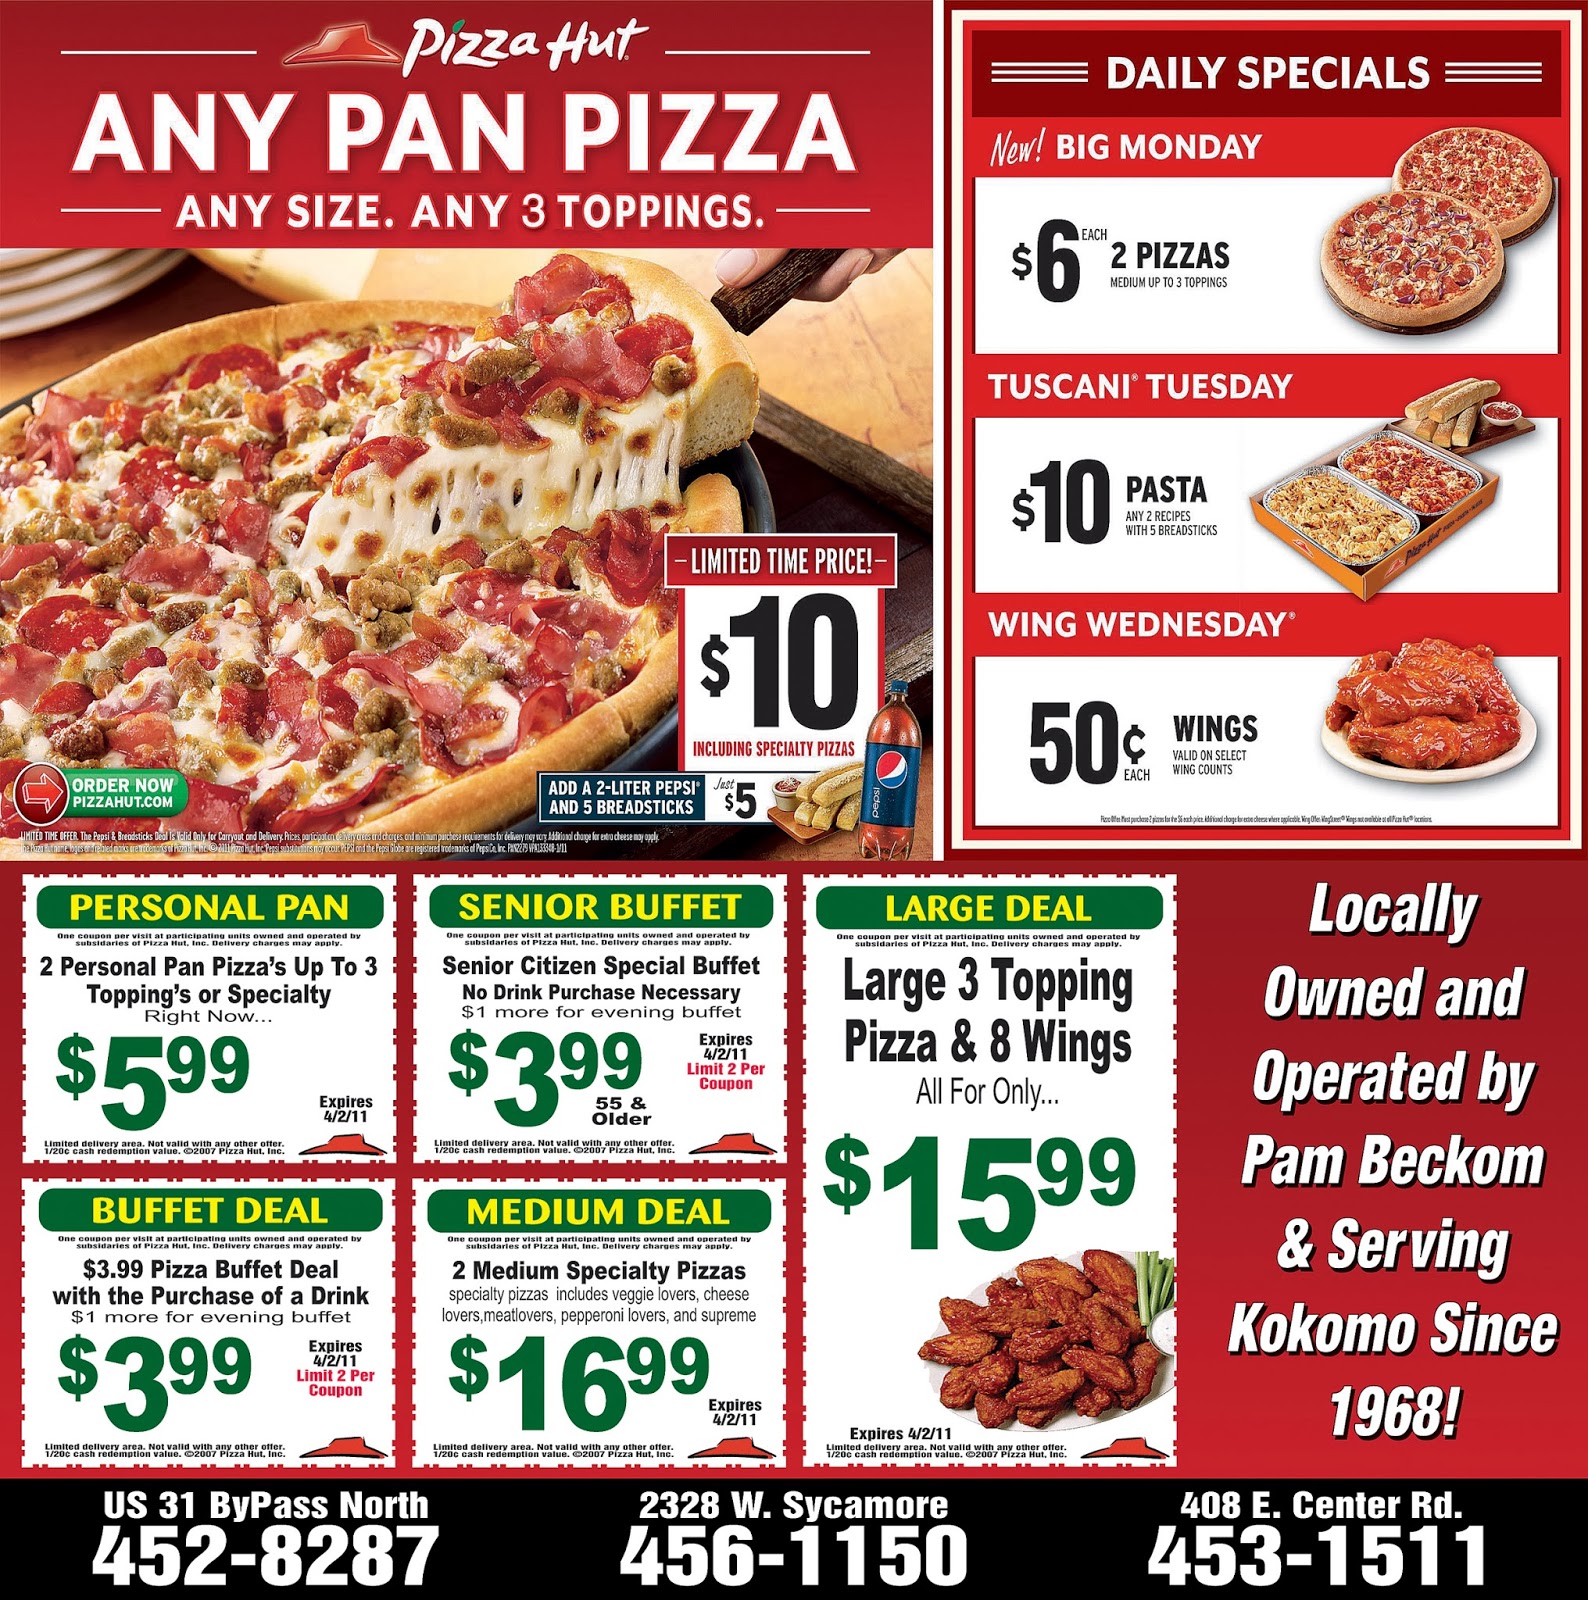 Get 1 large pizza and get 2rd, 3rd and 4th medium pizza for $5 @ Pizza Hut